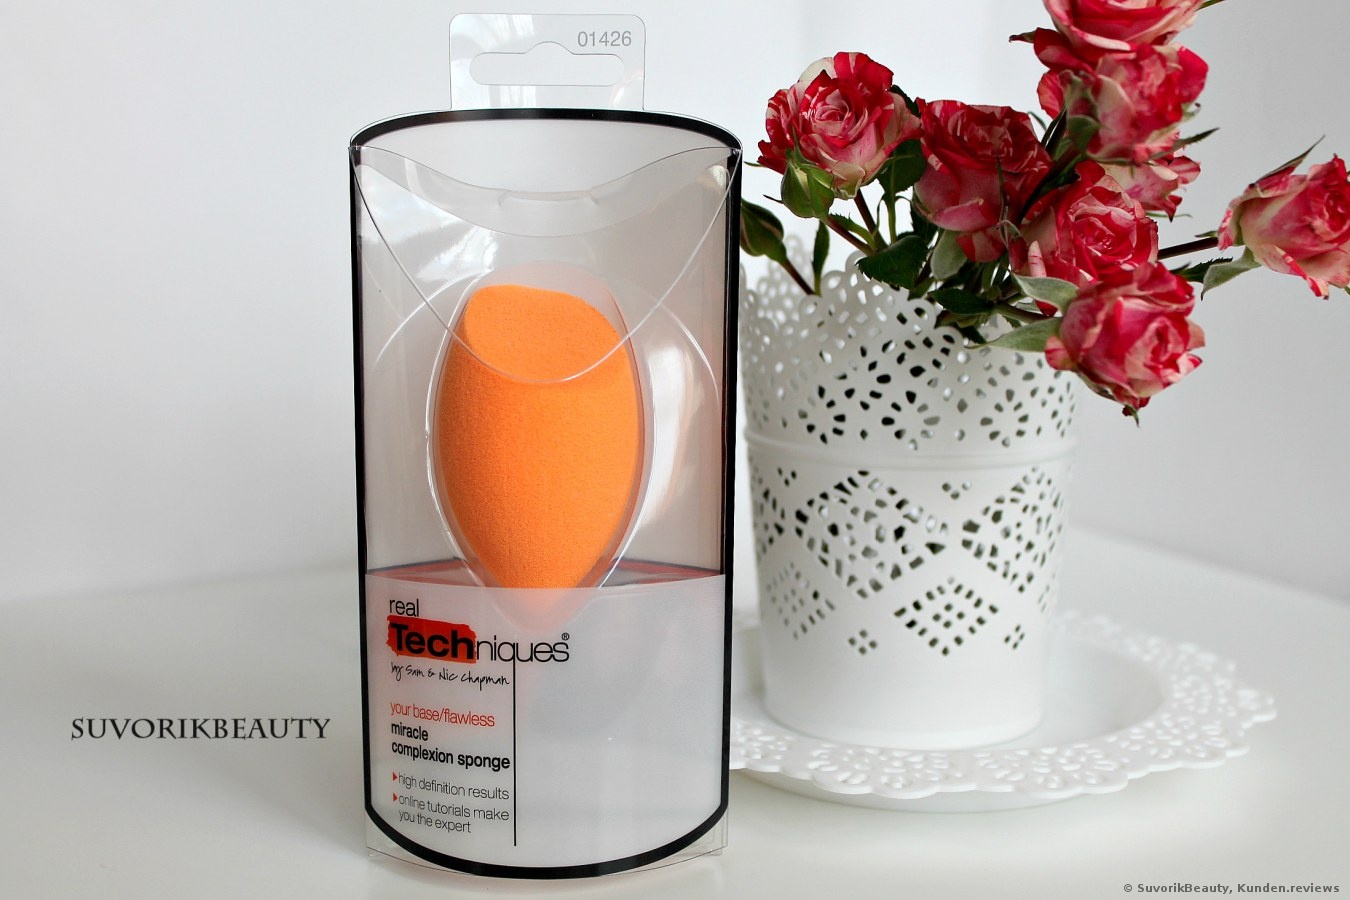 Real Techniques by Samantha Chapman Miracle Complexion Sponge Foto